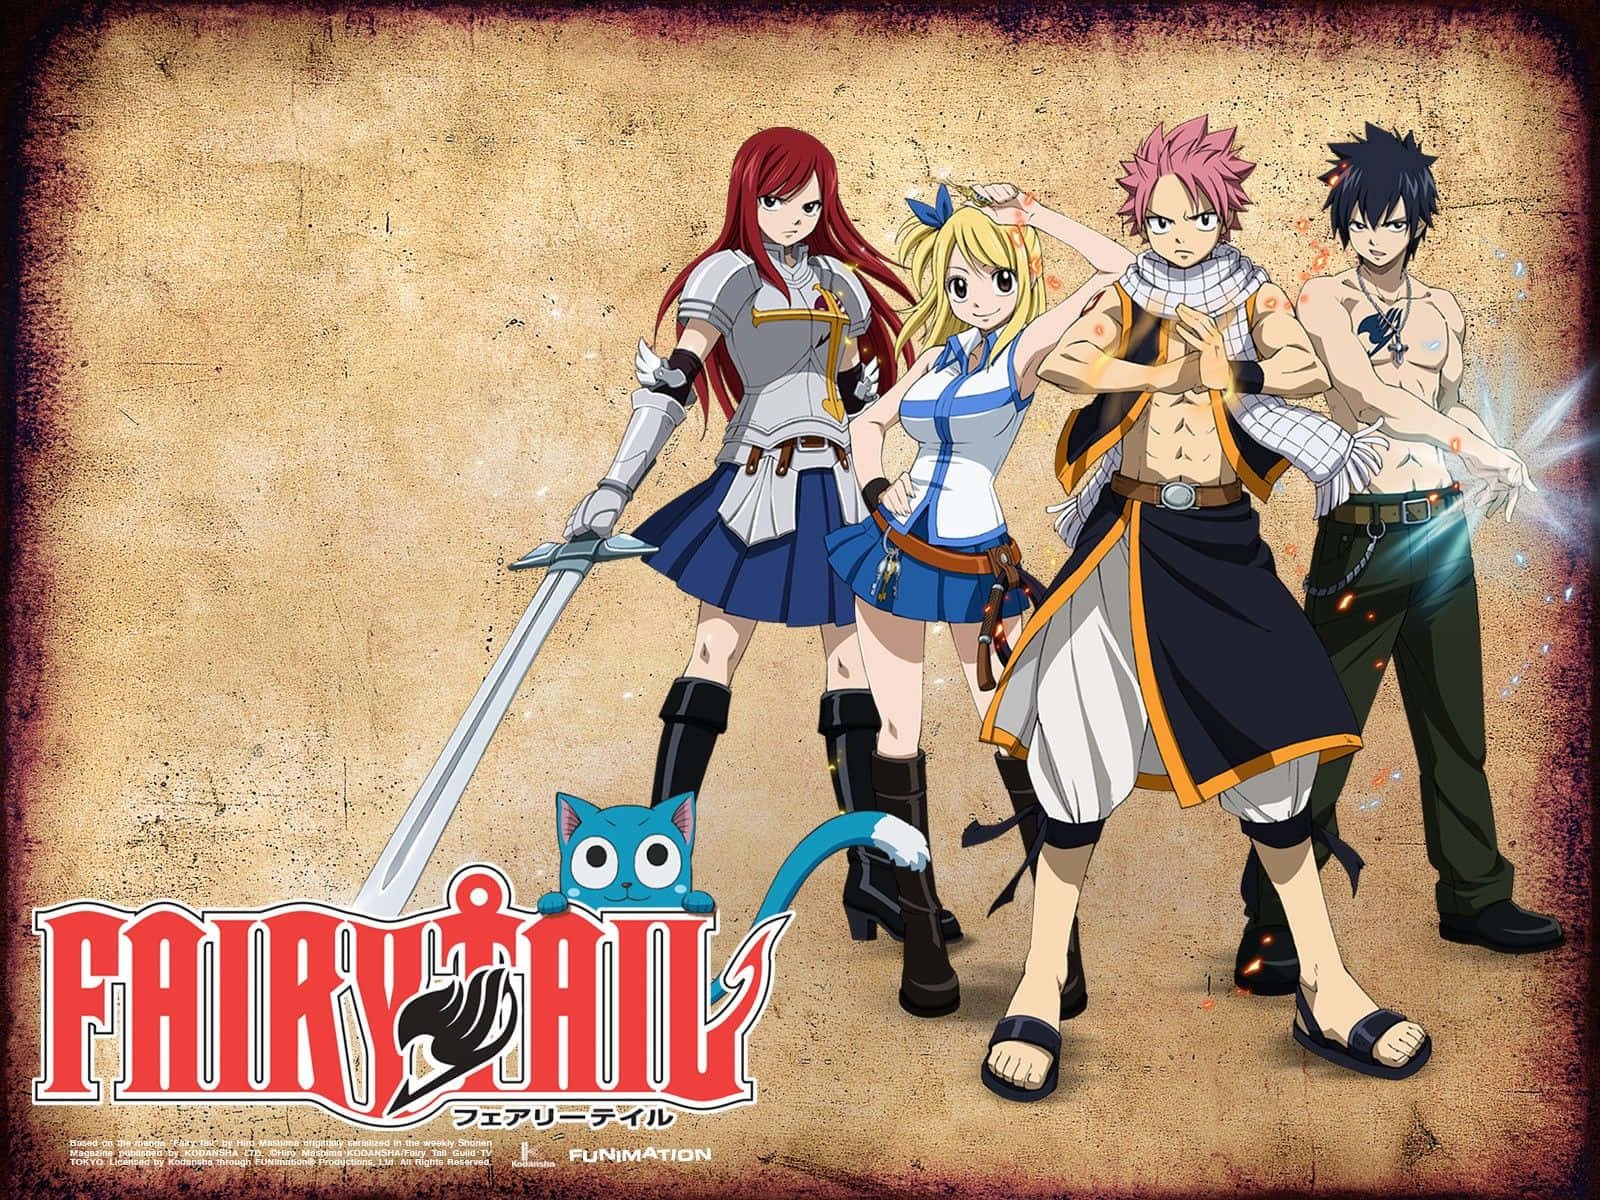 The legendary guild of Fairy Tail - Prepare for the magical adventure!